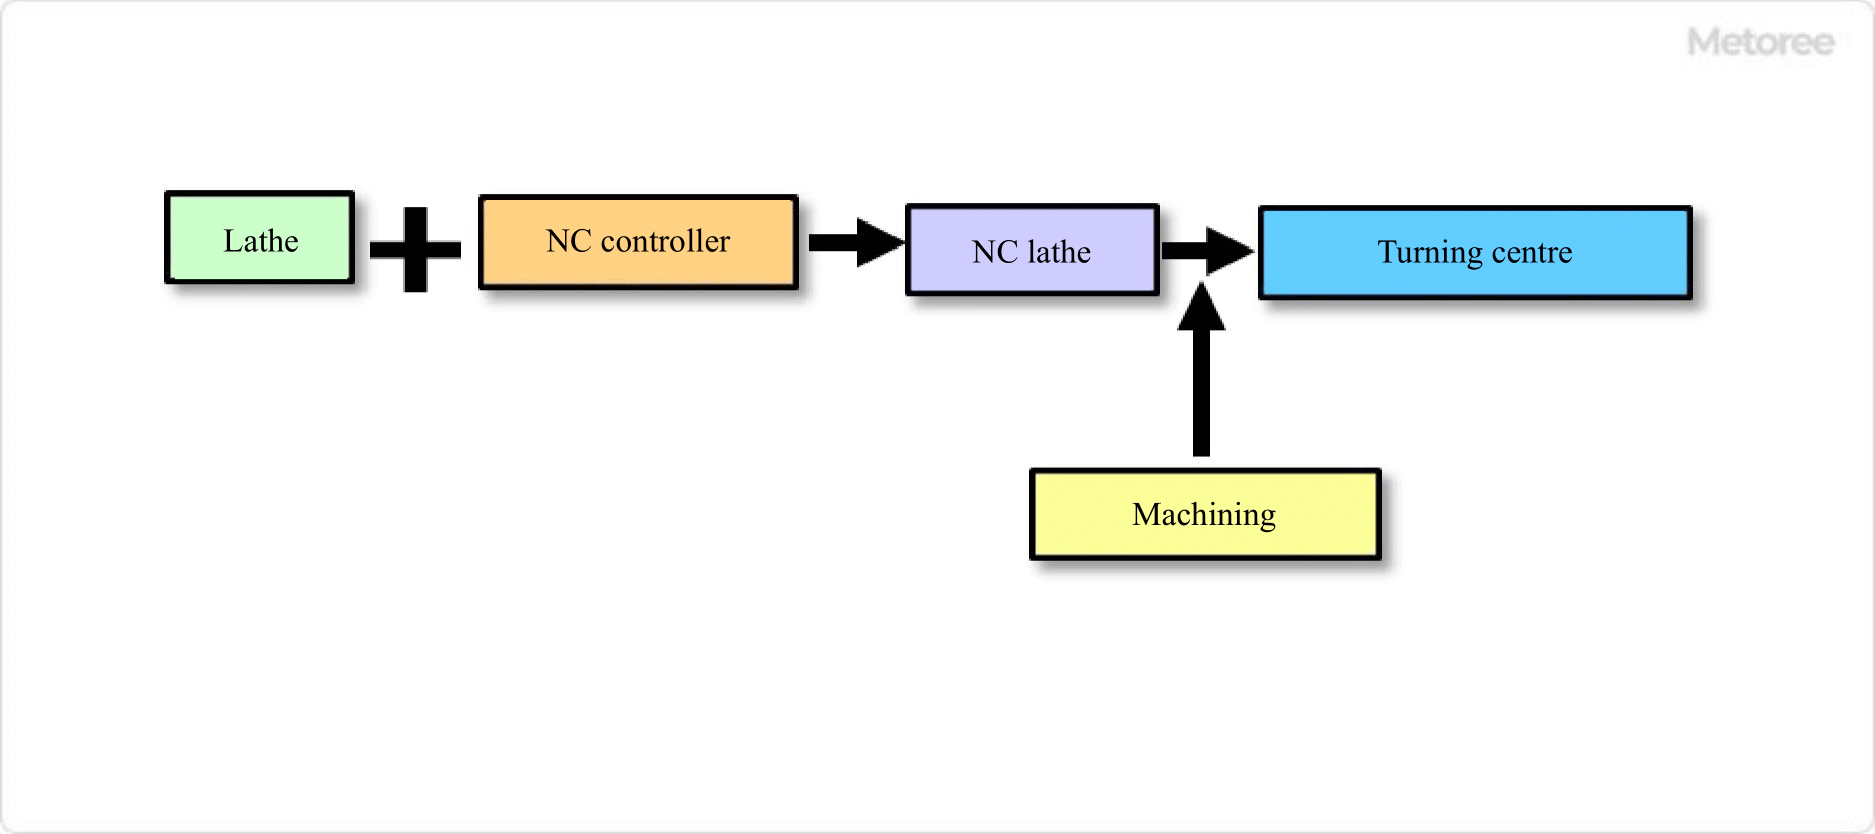 Figure 2. NC lathes and turning centres